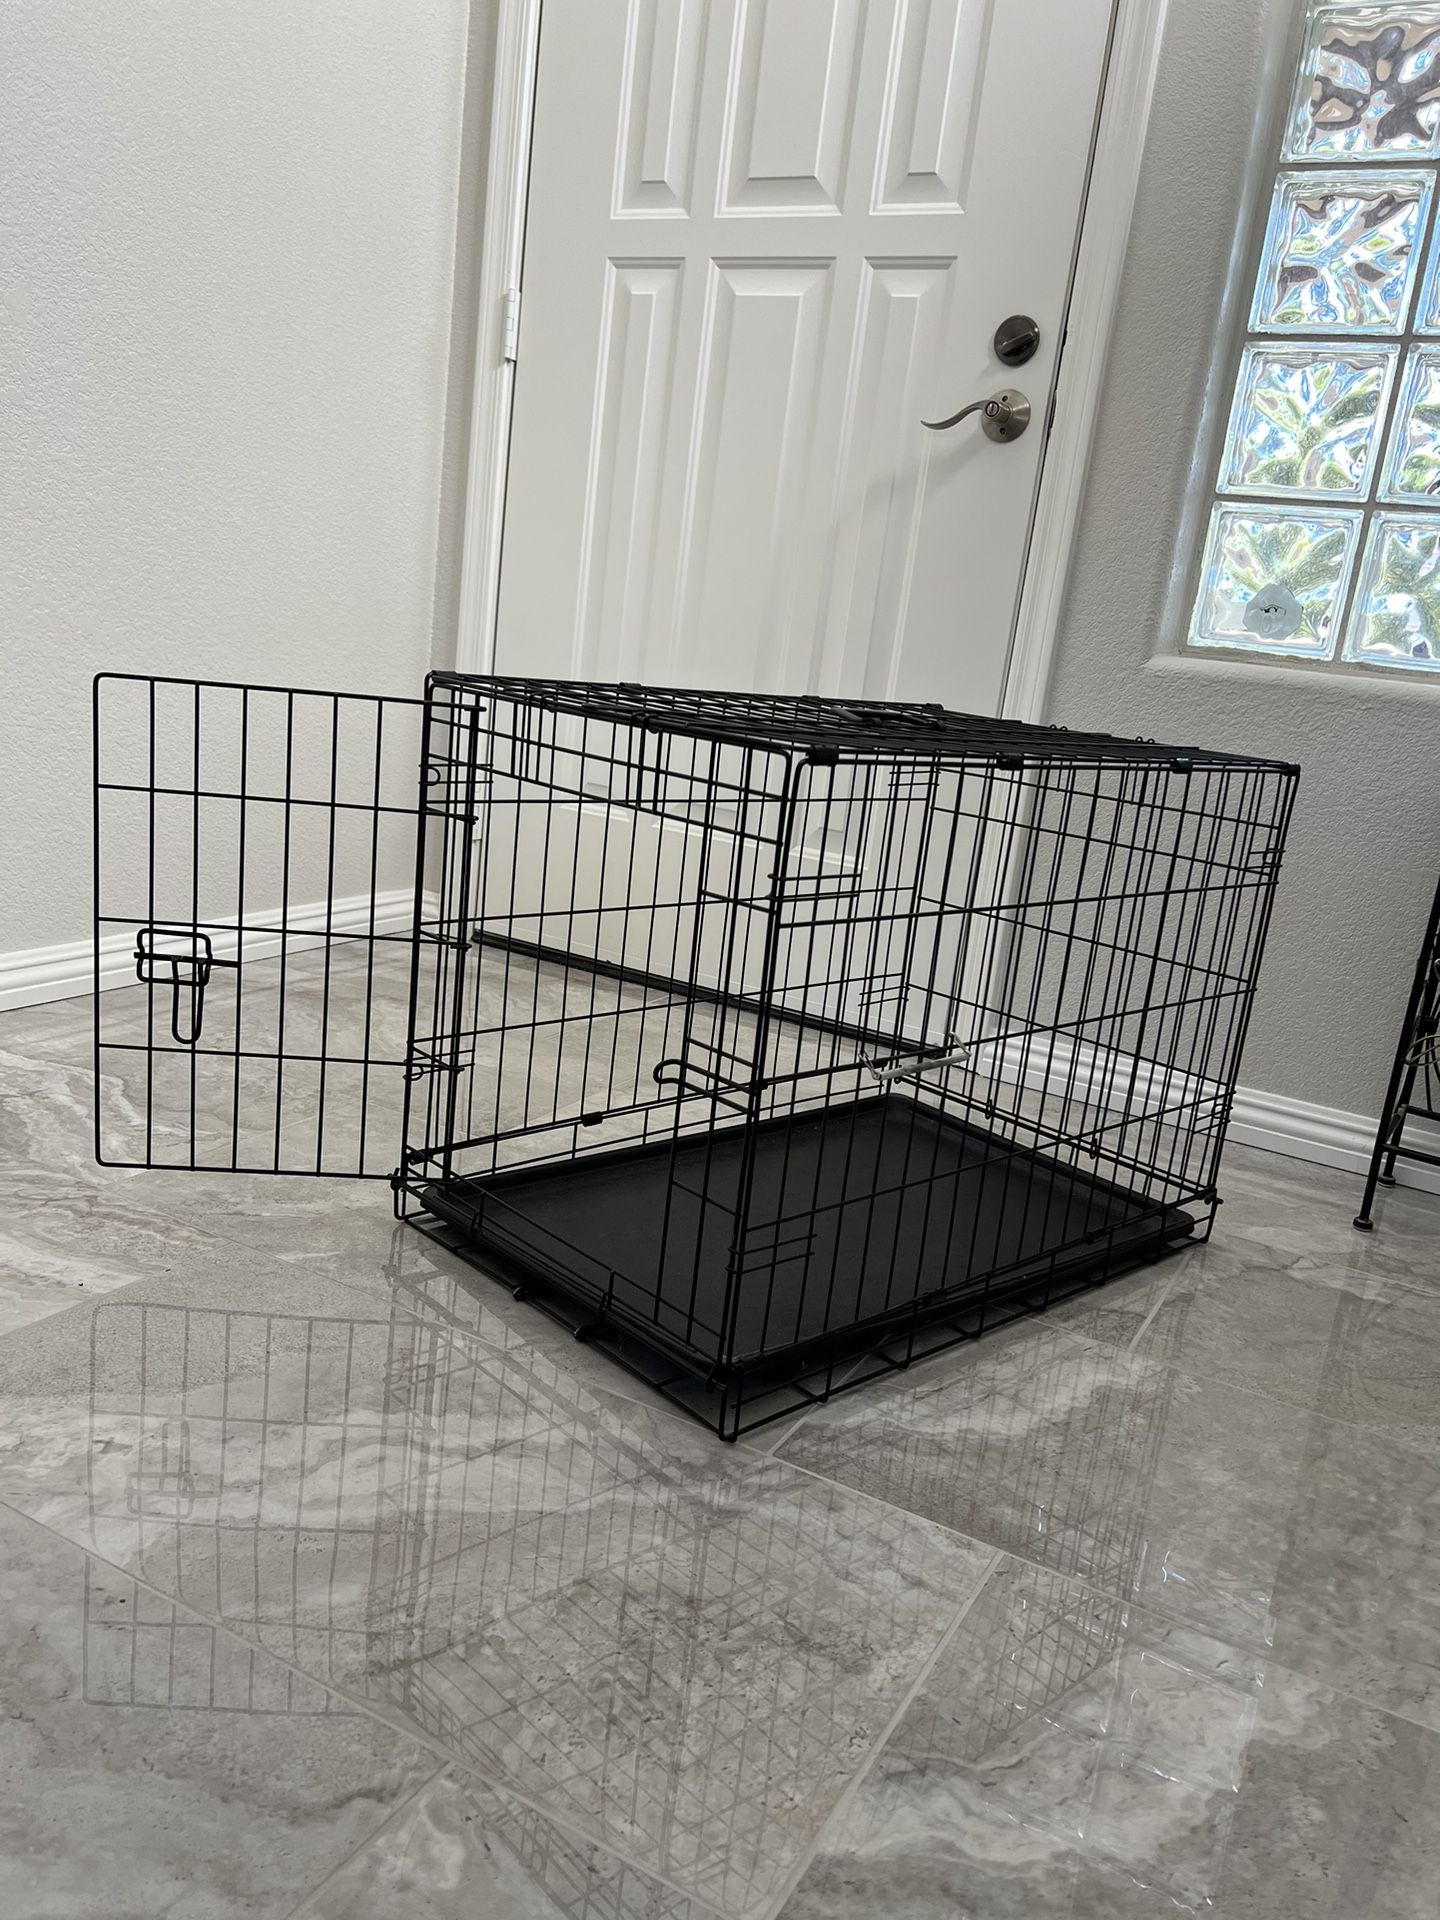 Medium Top Paw black folding dog crate - great condition 